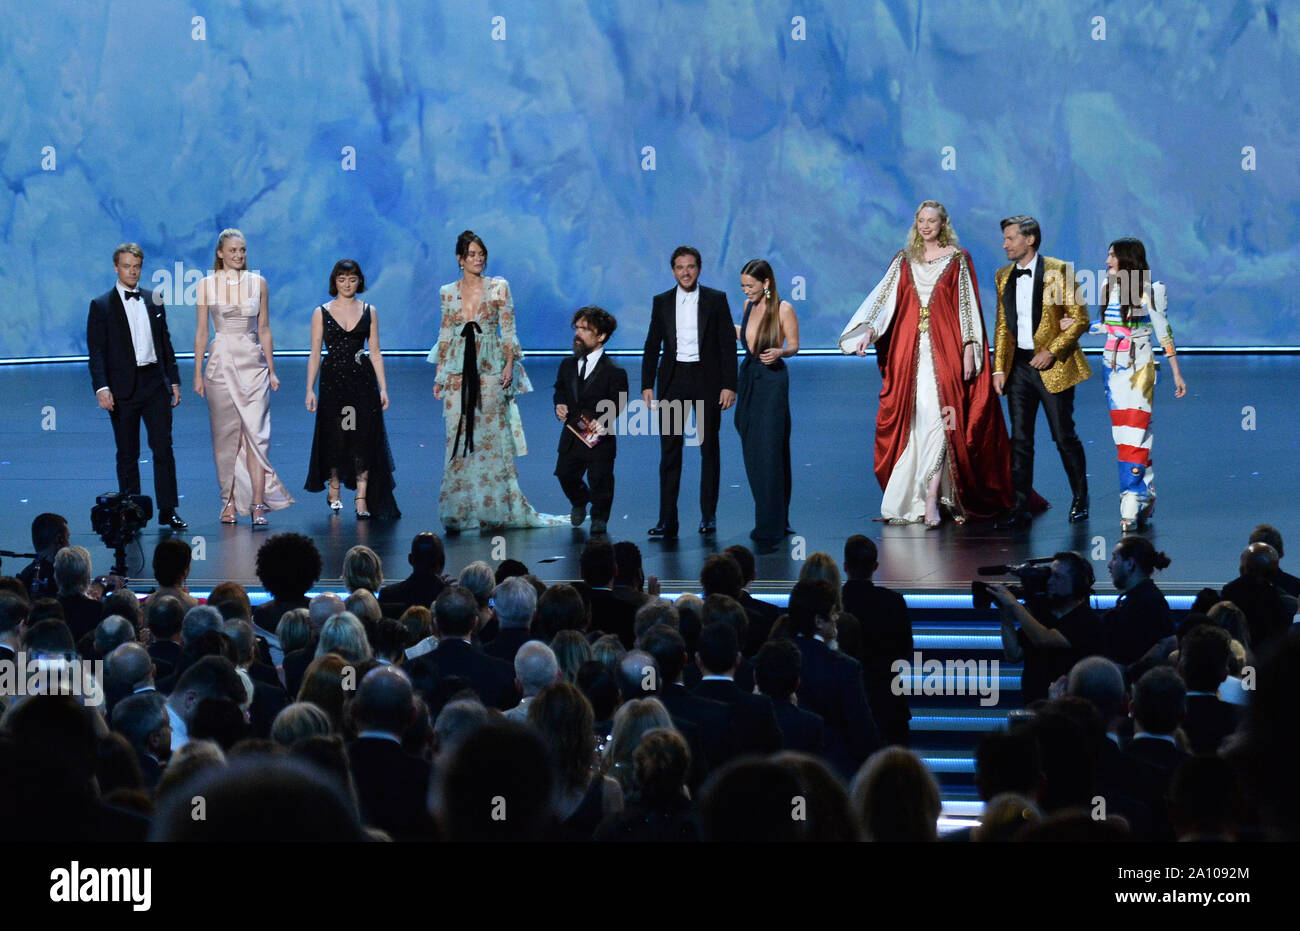 (L-R) Alfie Allen, Sophie Turner, Maisie Williams, Lena Headey, Peter Dinklage, Kit Harington, Emilia Clarke, Gwendoline Christie, Nikolaj Coster-Waldau, and Carice van Houten onstage during the 71st annual Primetime Emmy Awards at the Microsoft Theater in downtown Los Angeles on Sunday, September 22, 2019. Photo by Jim Ruymen/UPI Stock Photo